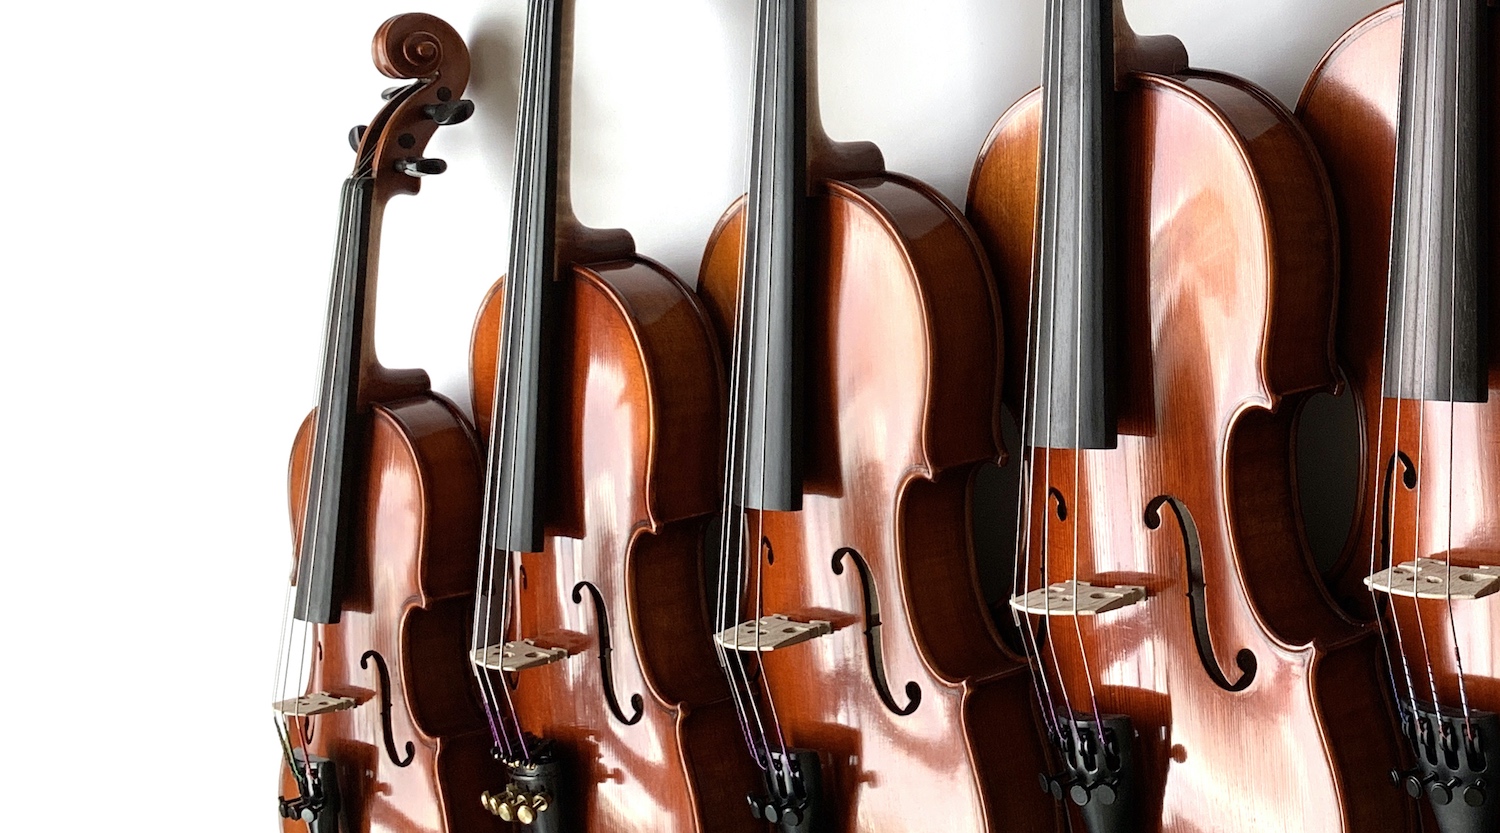 Violins from smallest to largest